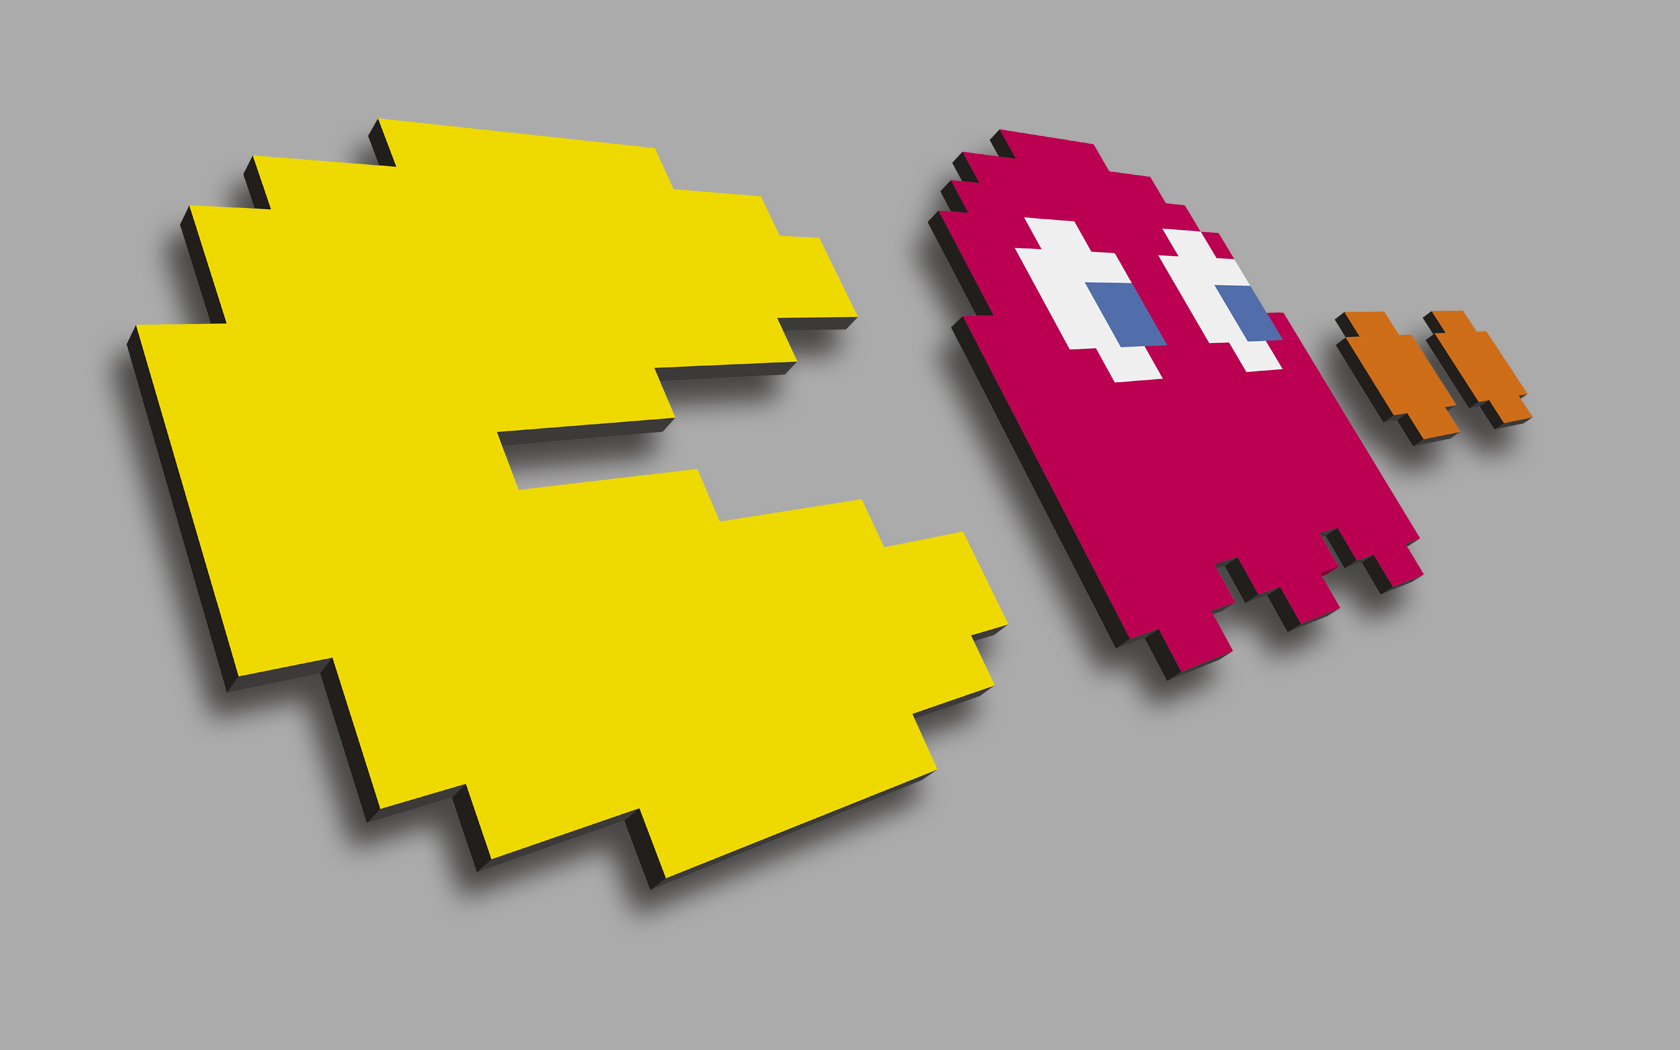 Pacman arcade game character on HD desktop wallpaper by polloposada.